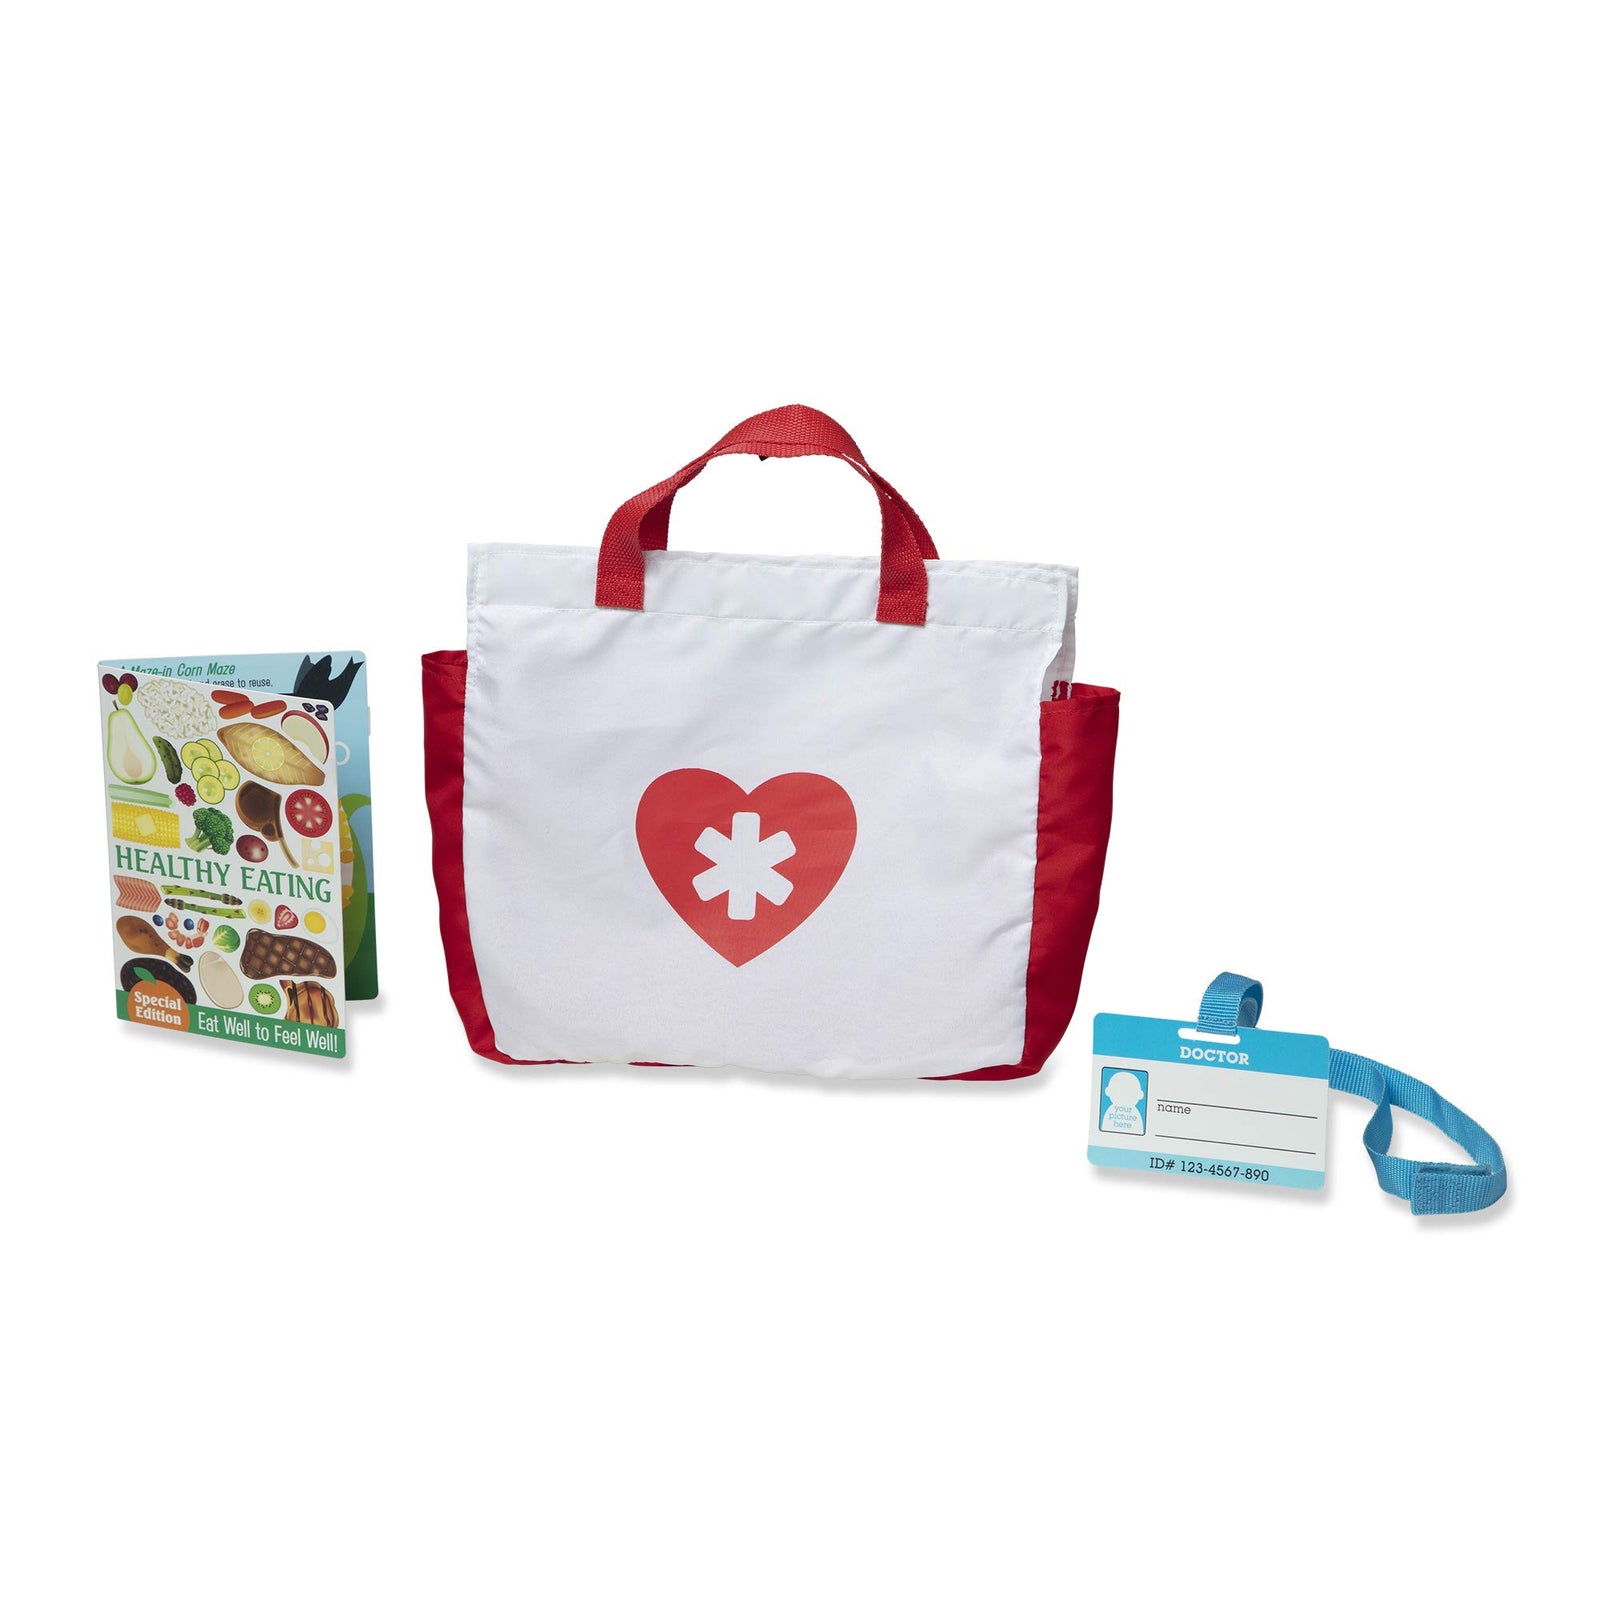 Melissa & Doug Get Well Doctor’s Kit Play Set – 25 Toy Pieces